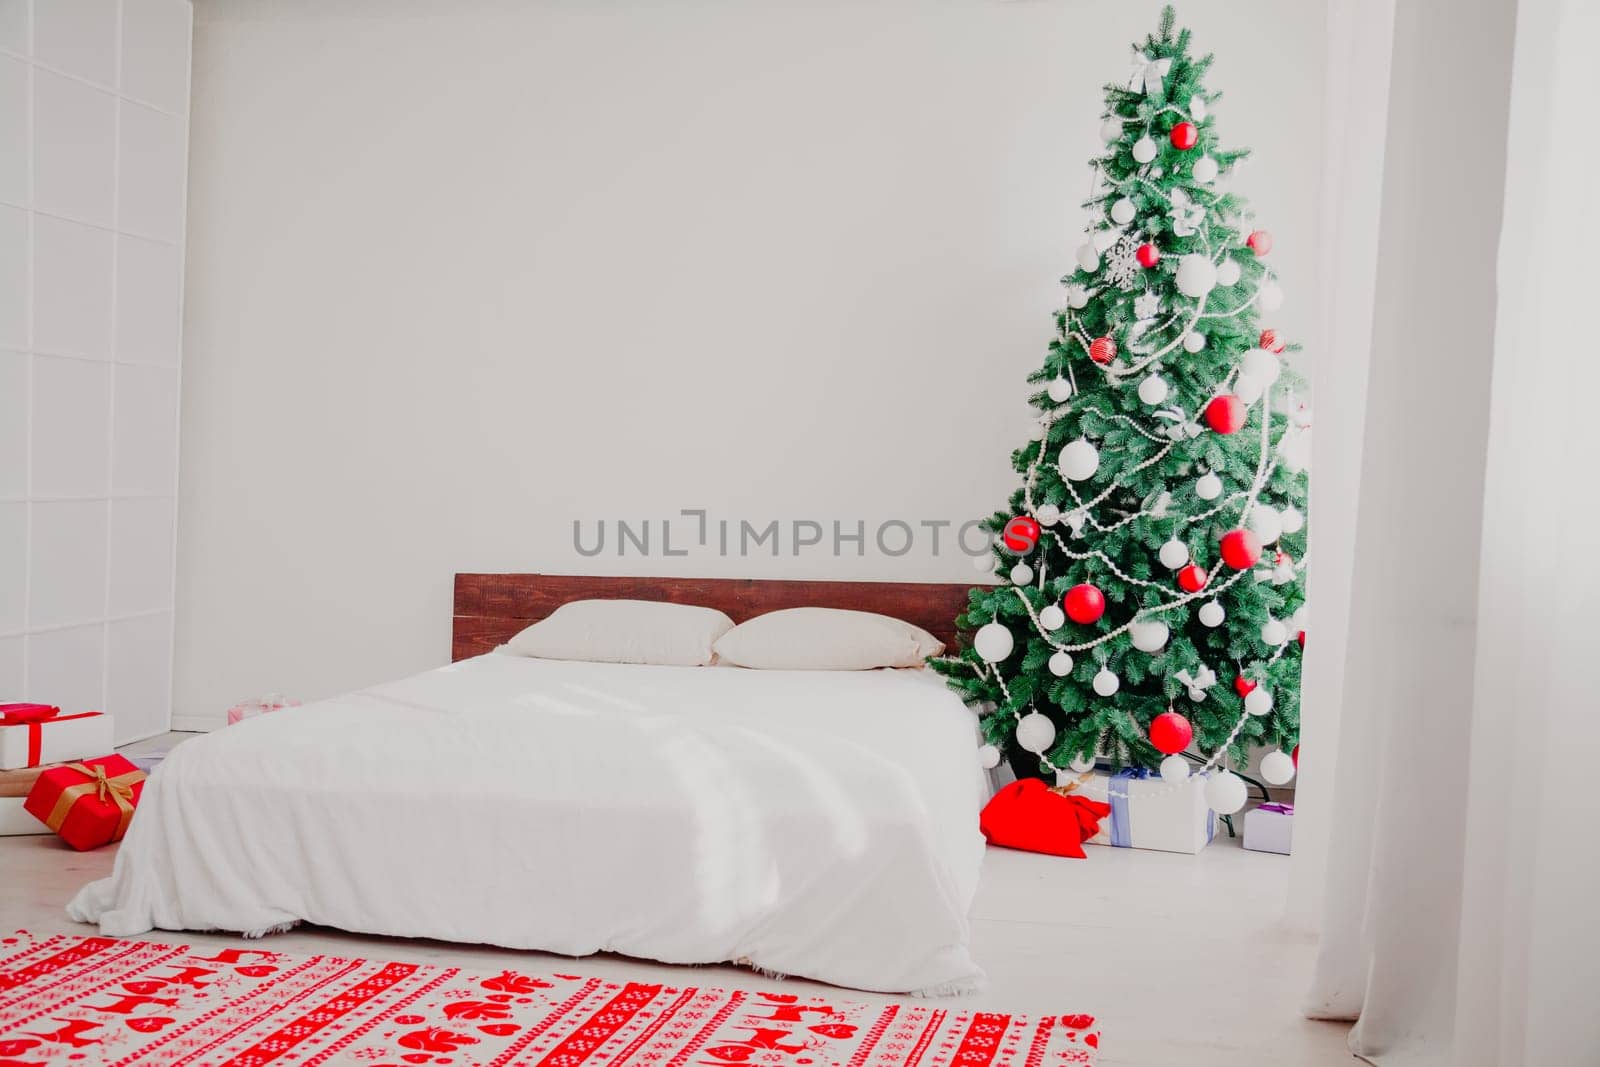 new year House bedroom bed Christmas tree holiday gifts